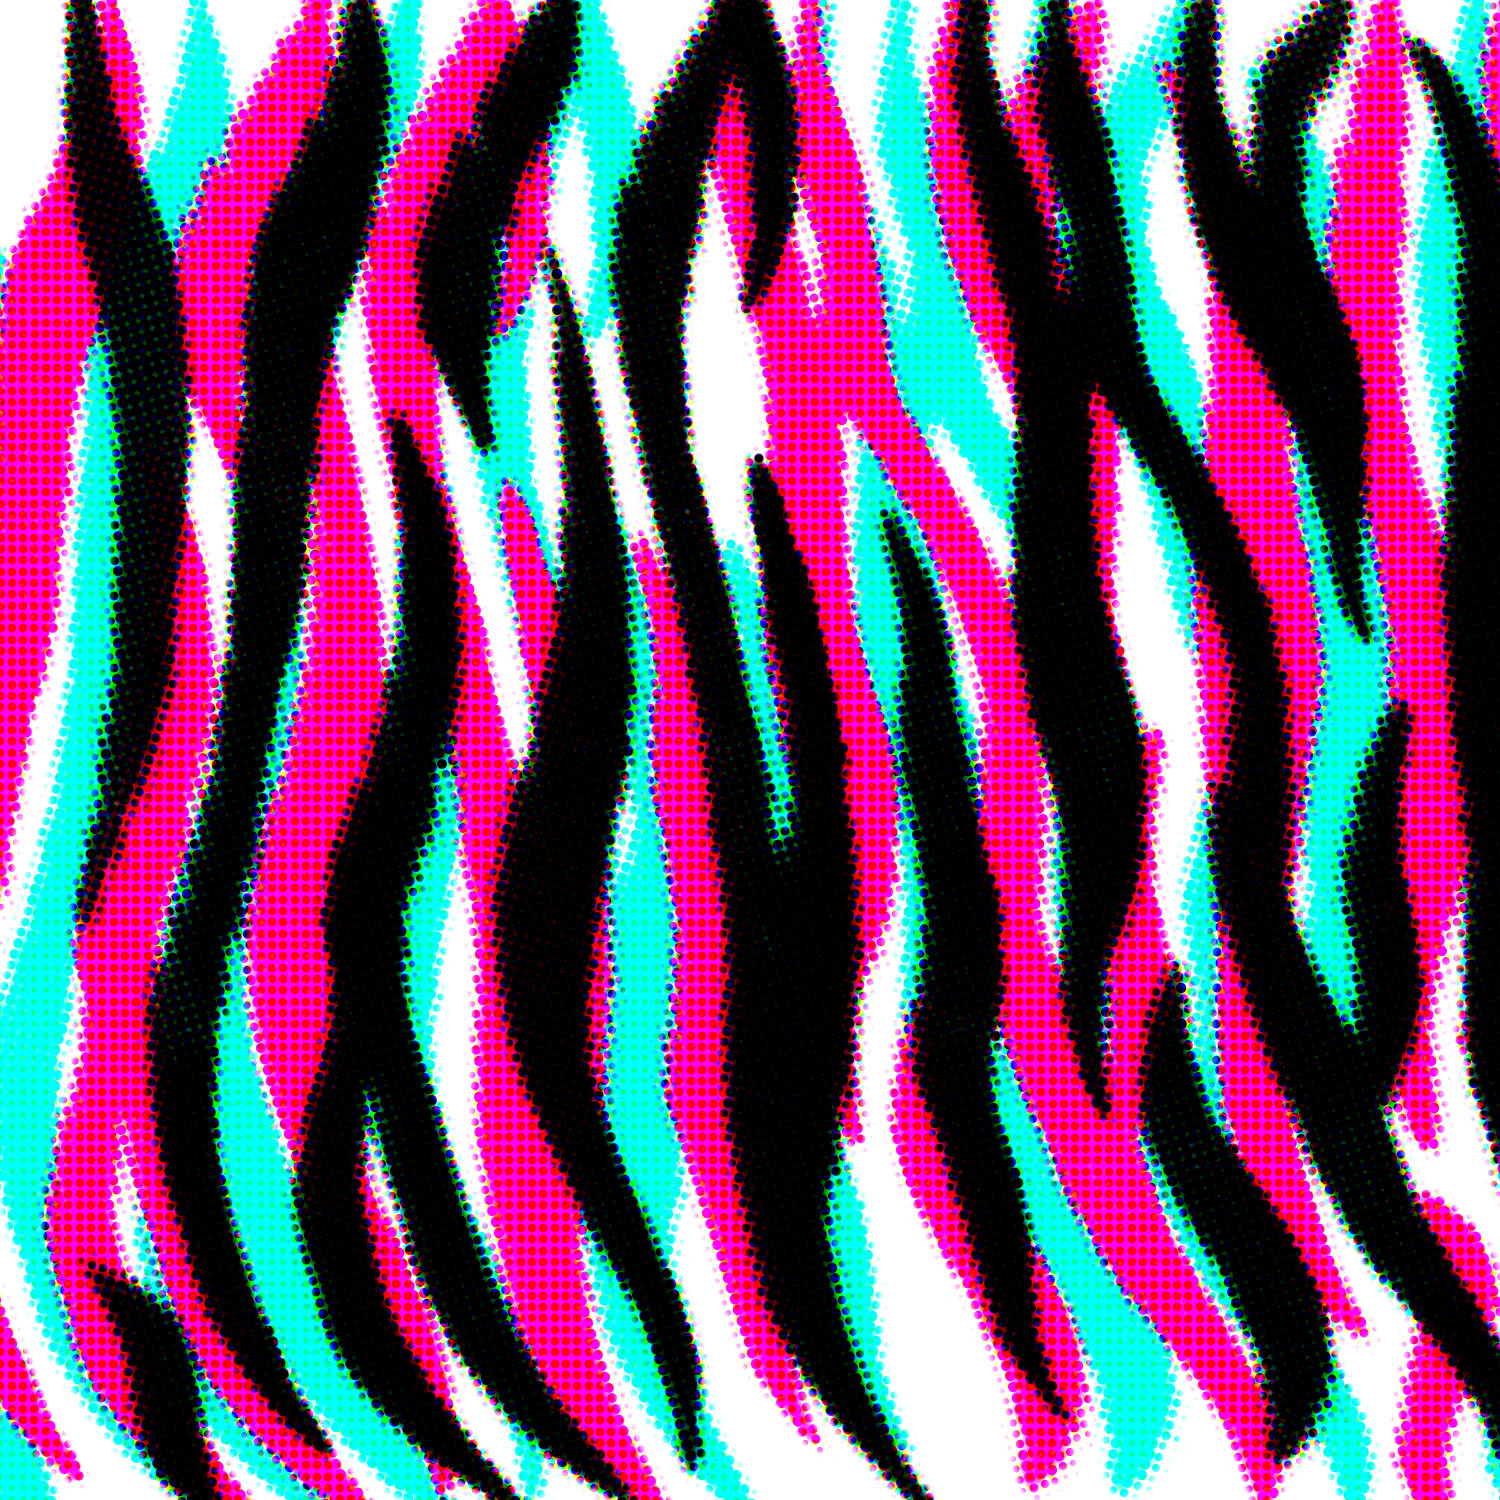 Neon Colorful Zebra Backgrounds